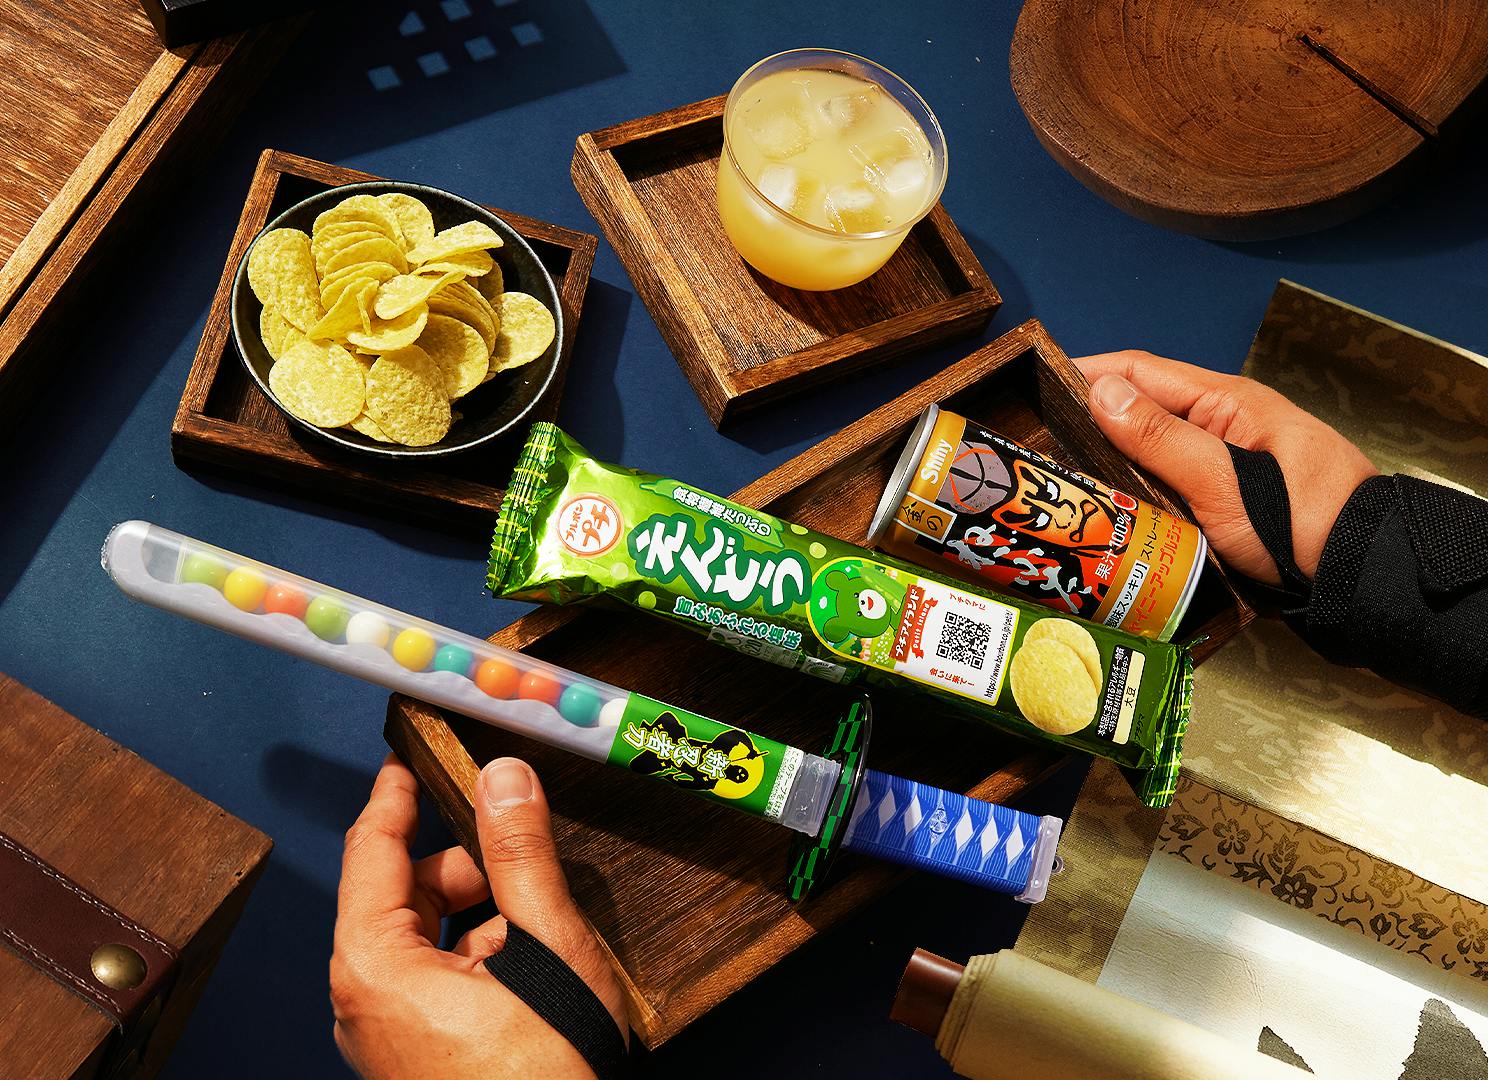 Katana Candy Sword, Endou Pea Chips, and Gold Nebuta Apple Juice sit on a blue and dark wood background, surrounded by ninja motifs.